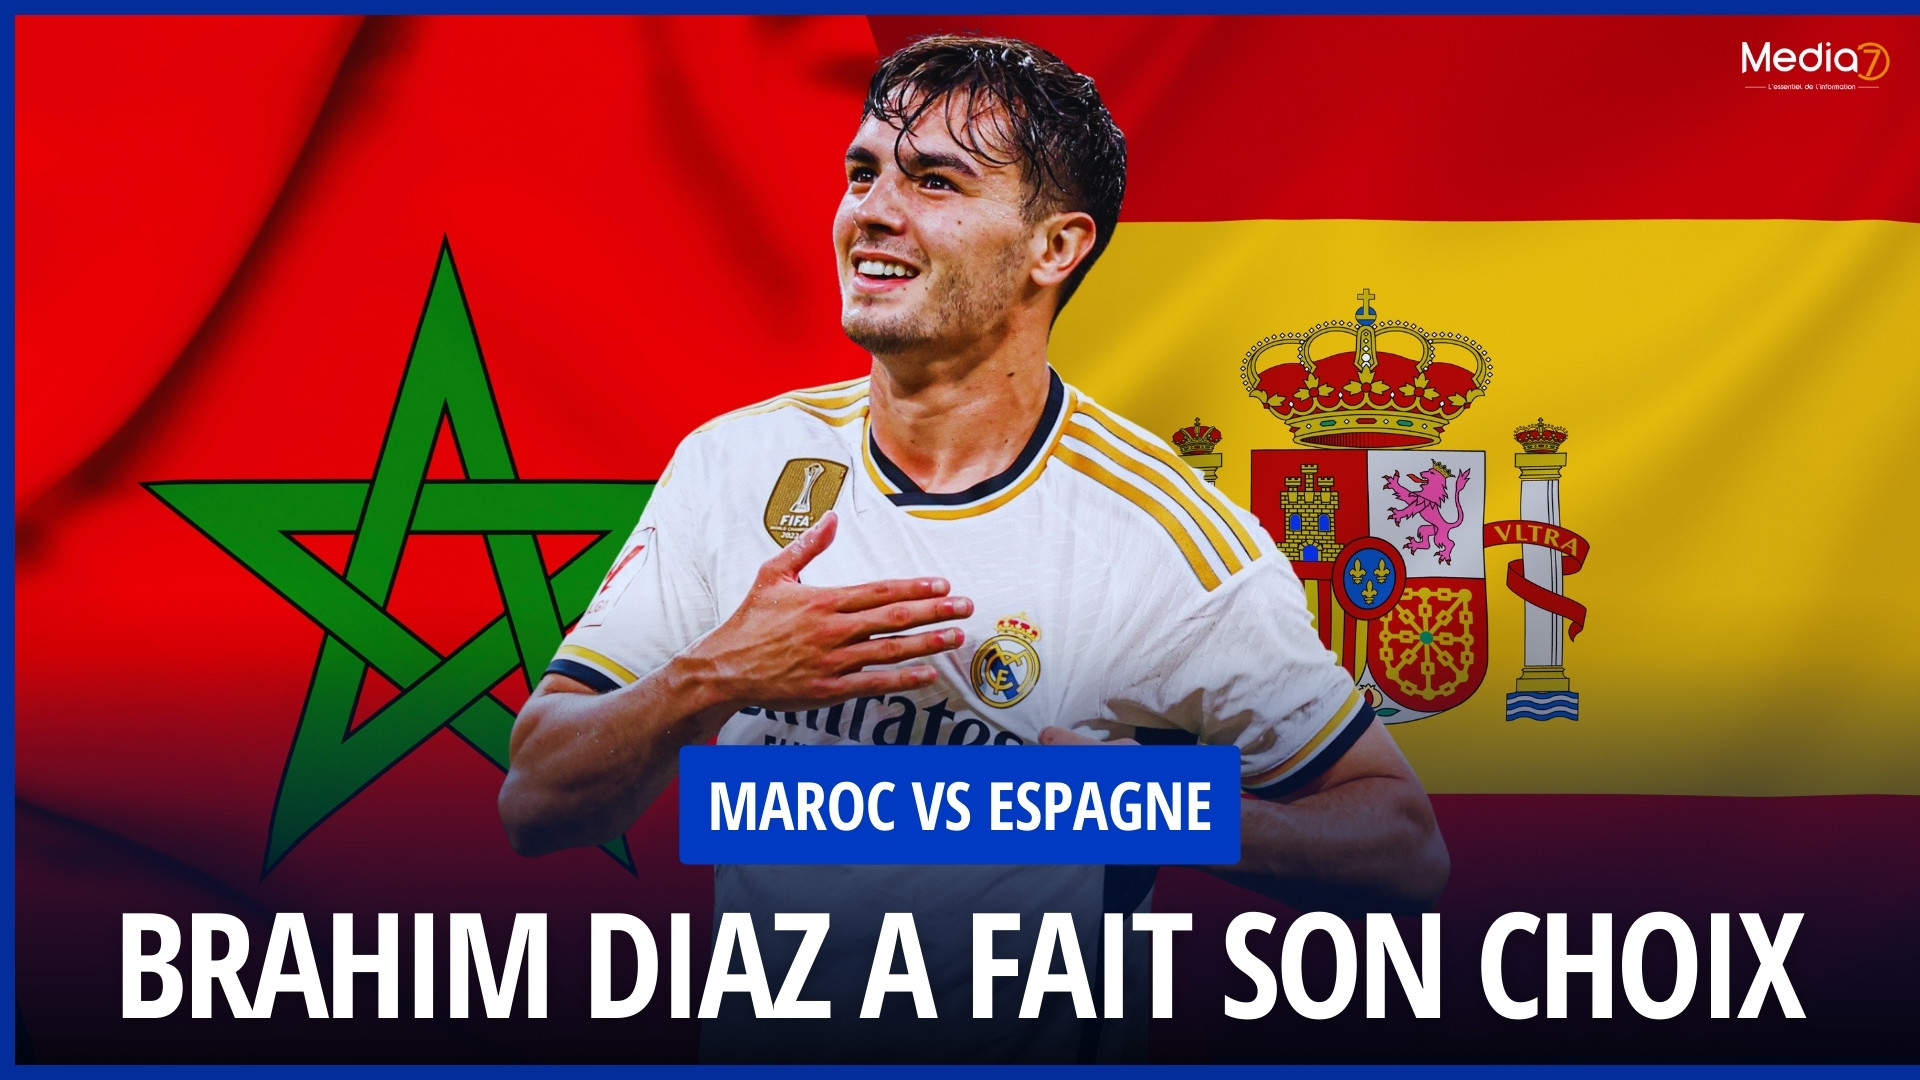 Morocco Vs Spain: Brahim Diaz has made his choice and puts an end to speculation - Media7